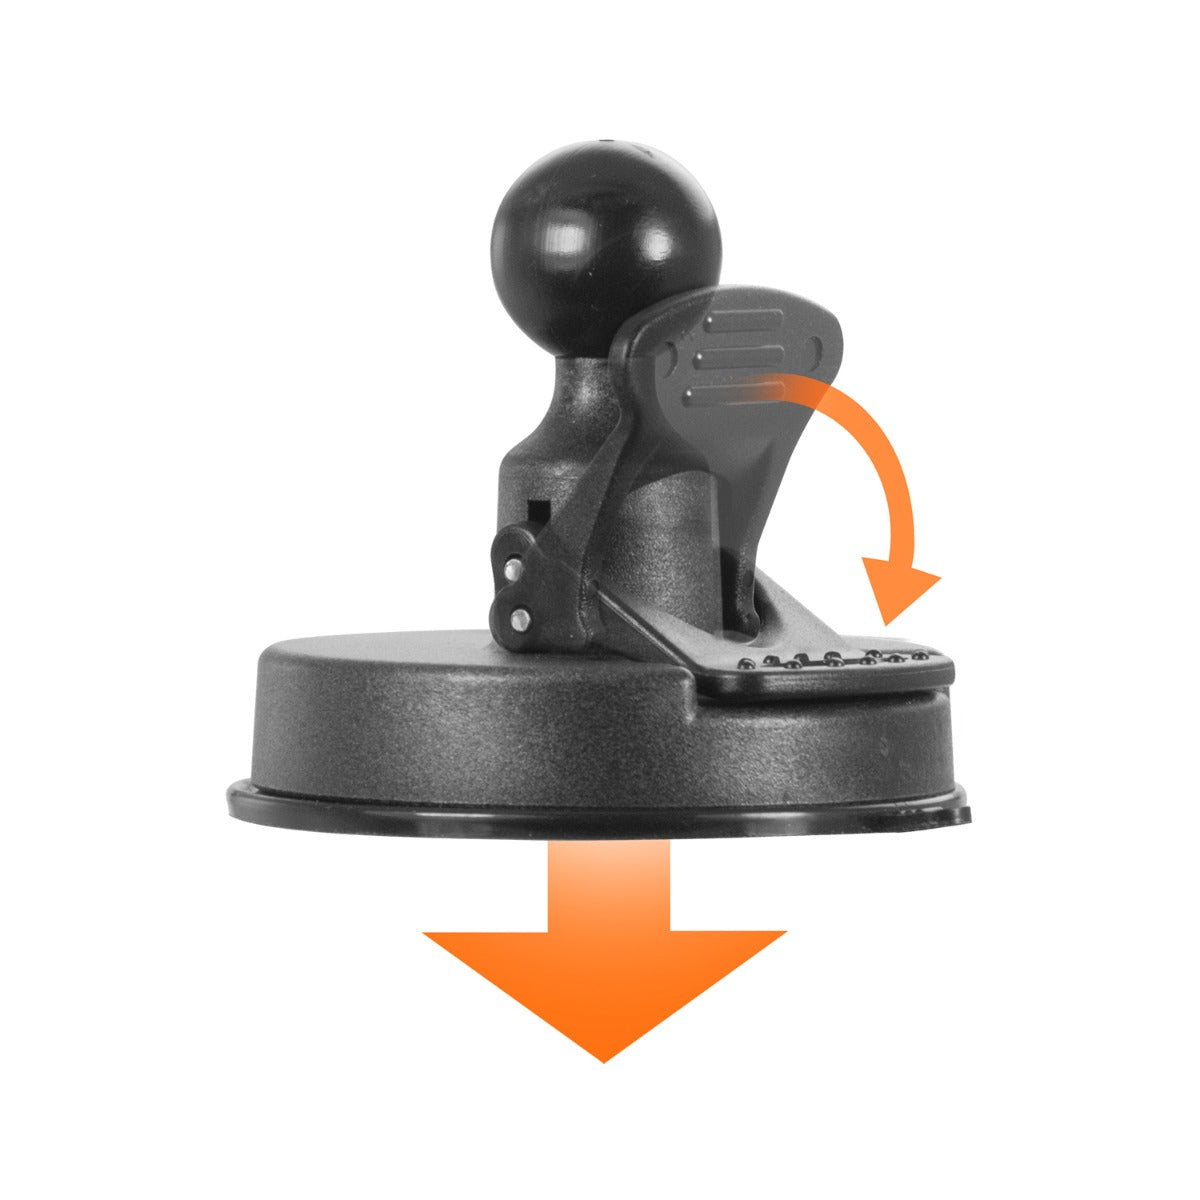 iBOLT ¼” 20 Camera Screw Bizmount™ Suction Cup Mount - for Industry Standard ¼” 20 Accessories